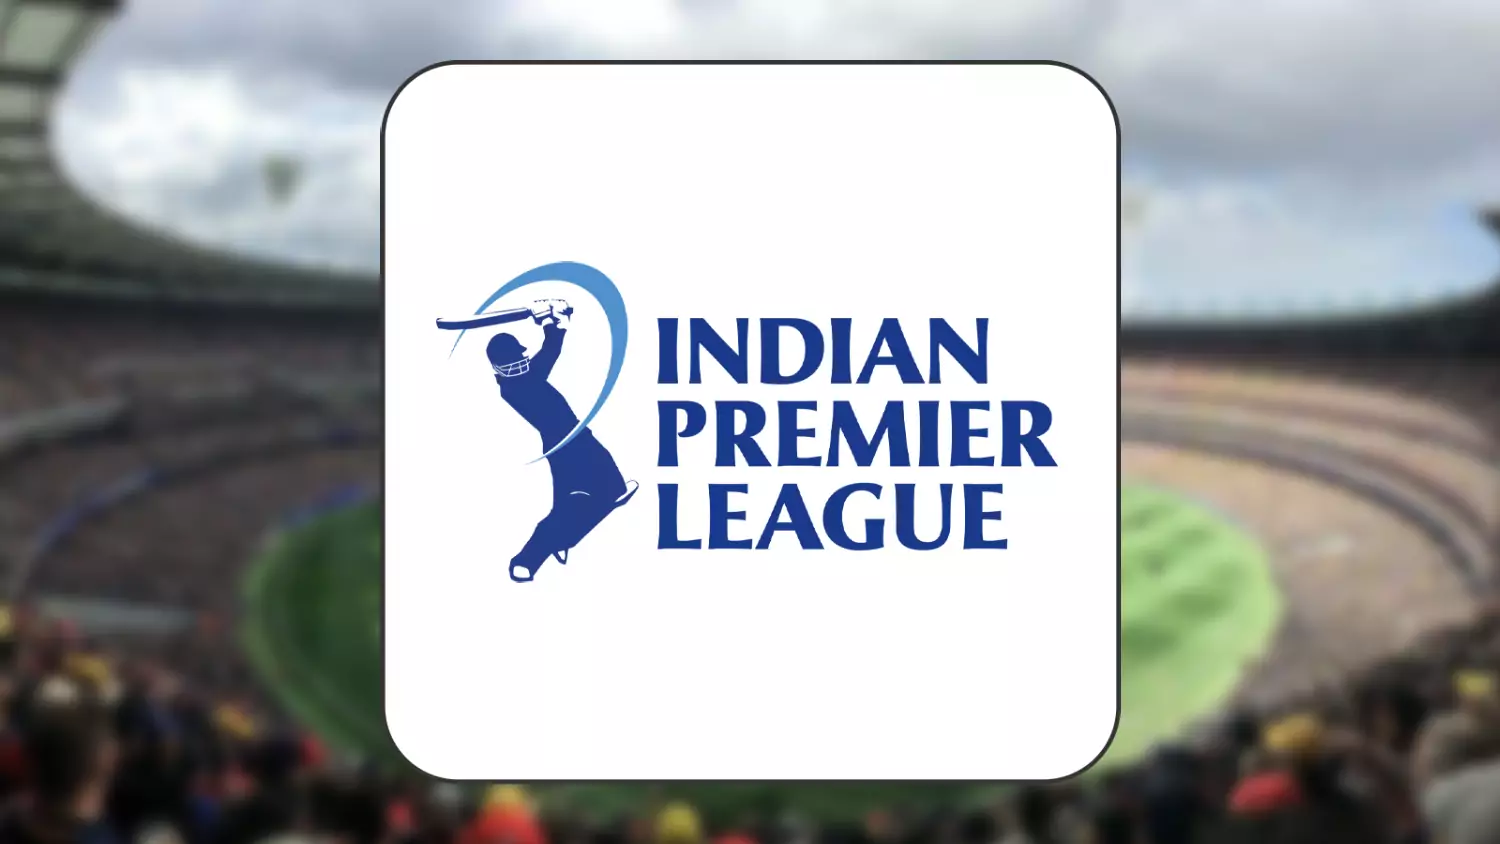 IPL is the most important and popular cricket tournament.